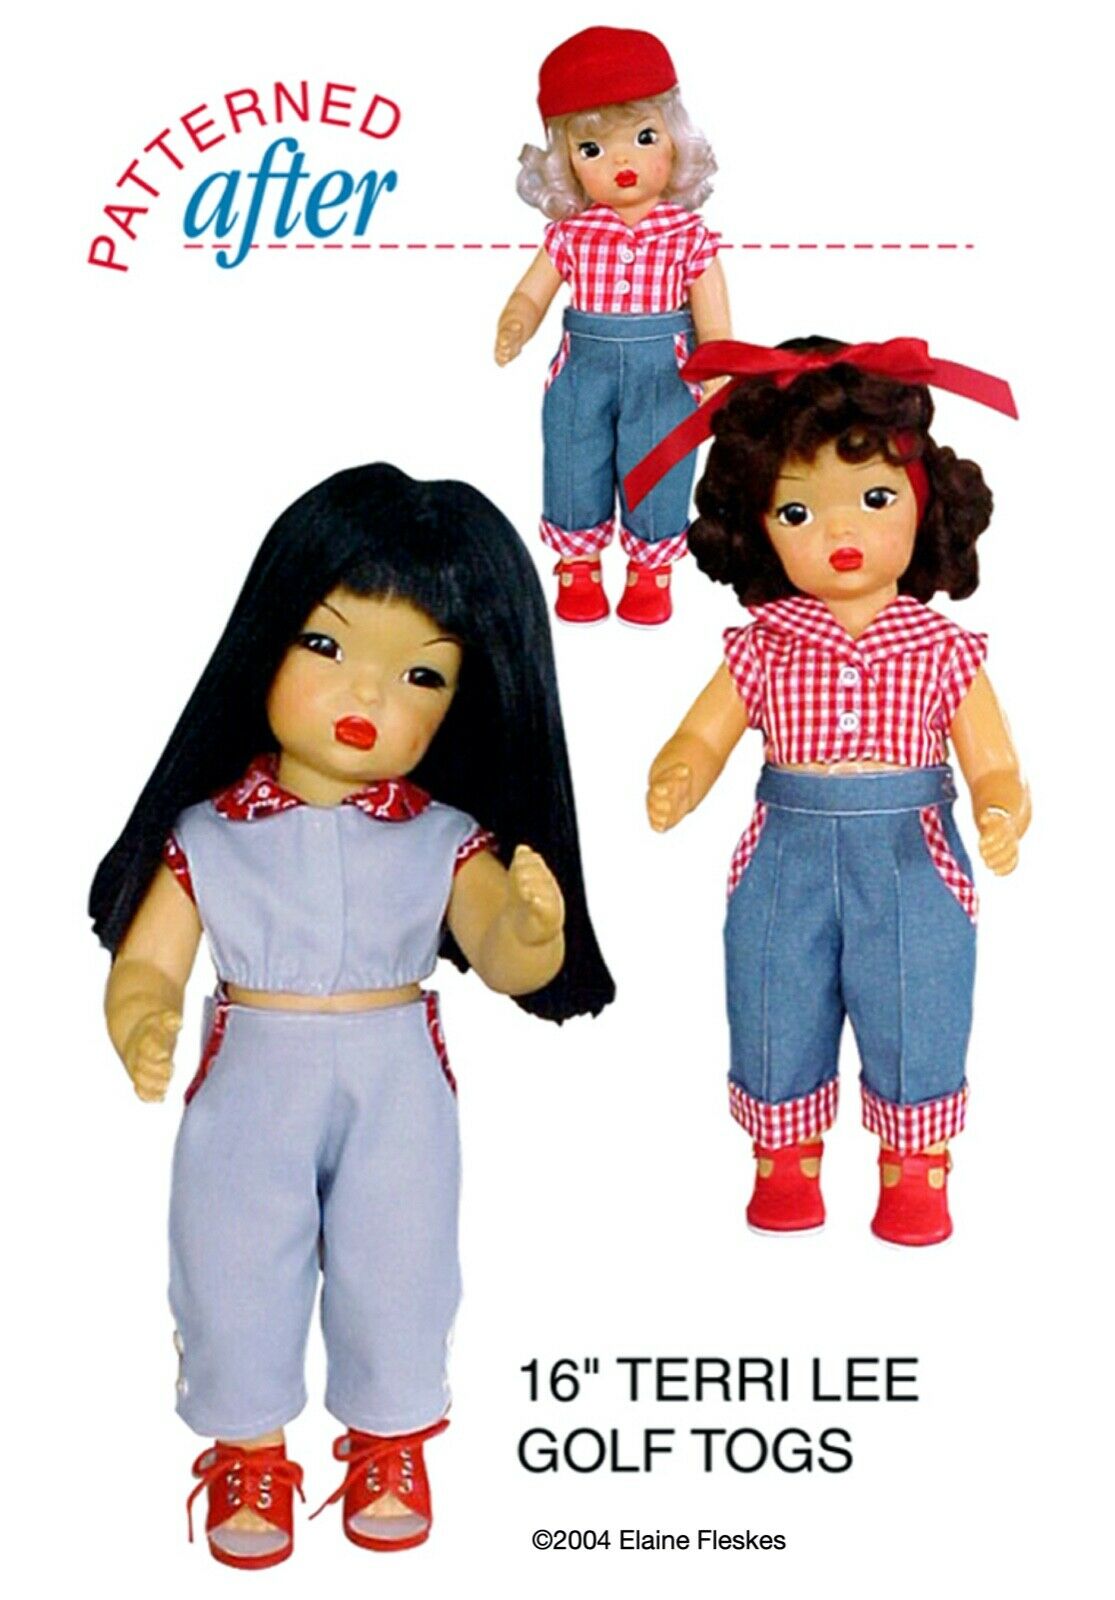 Golf Togs Clothing Patterns For 16" Terri And Jerri Lee Doll